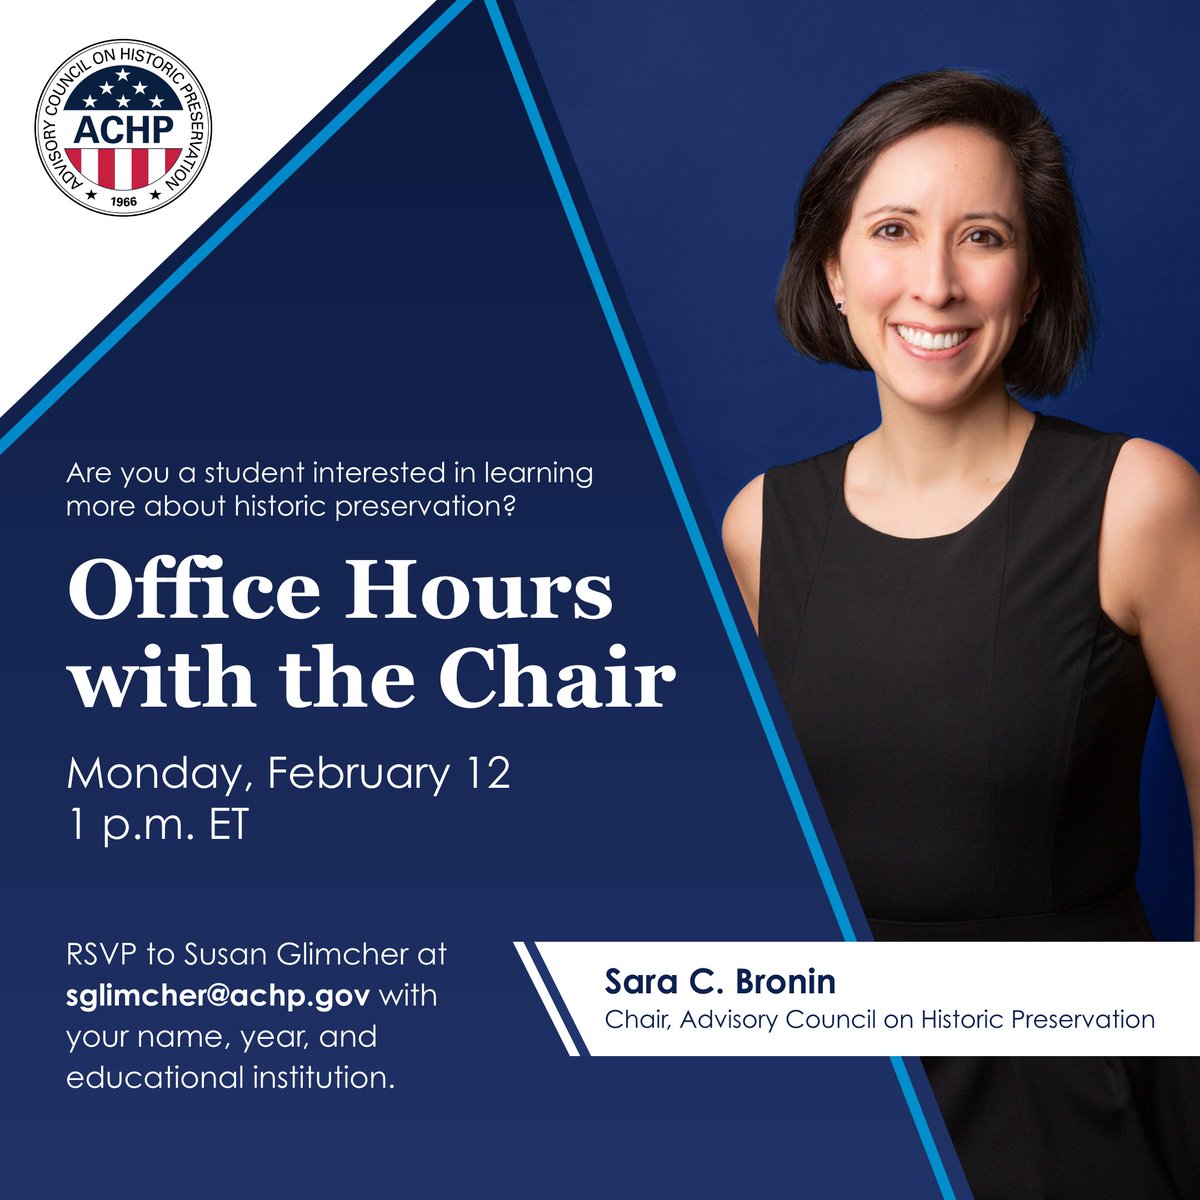 Students interested in learning more about the field of historic preservation, you’re invited to join ACHP @ChairBronin for Office Hours, 1 p.m. EST Mon. Feb.12. You can speak directly with Chair Bronin & ask her questions. RSVP sglimcher@achp.gov w/name, year, and school.